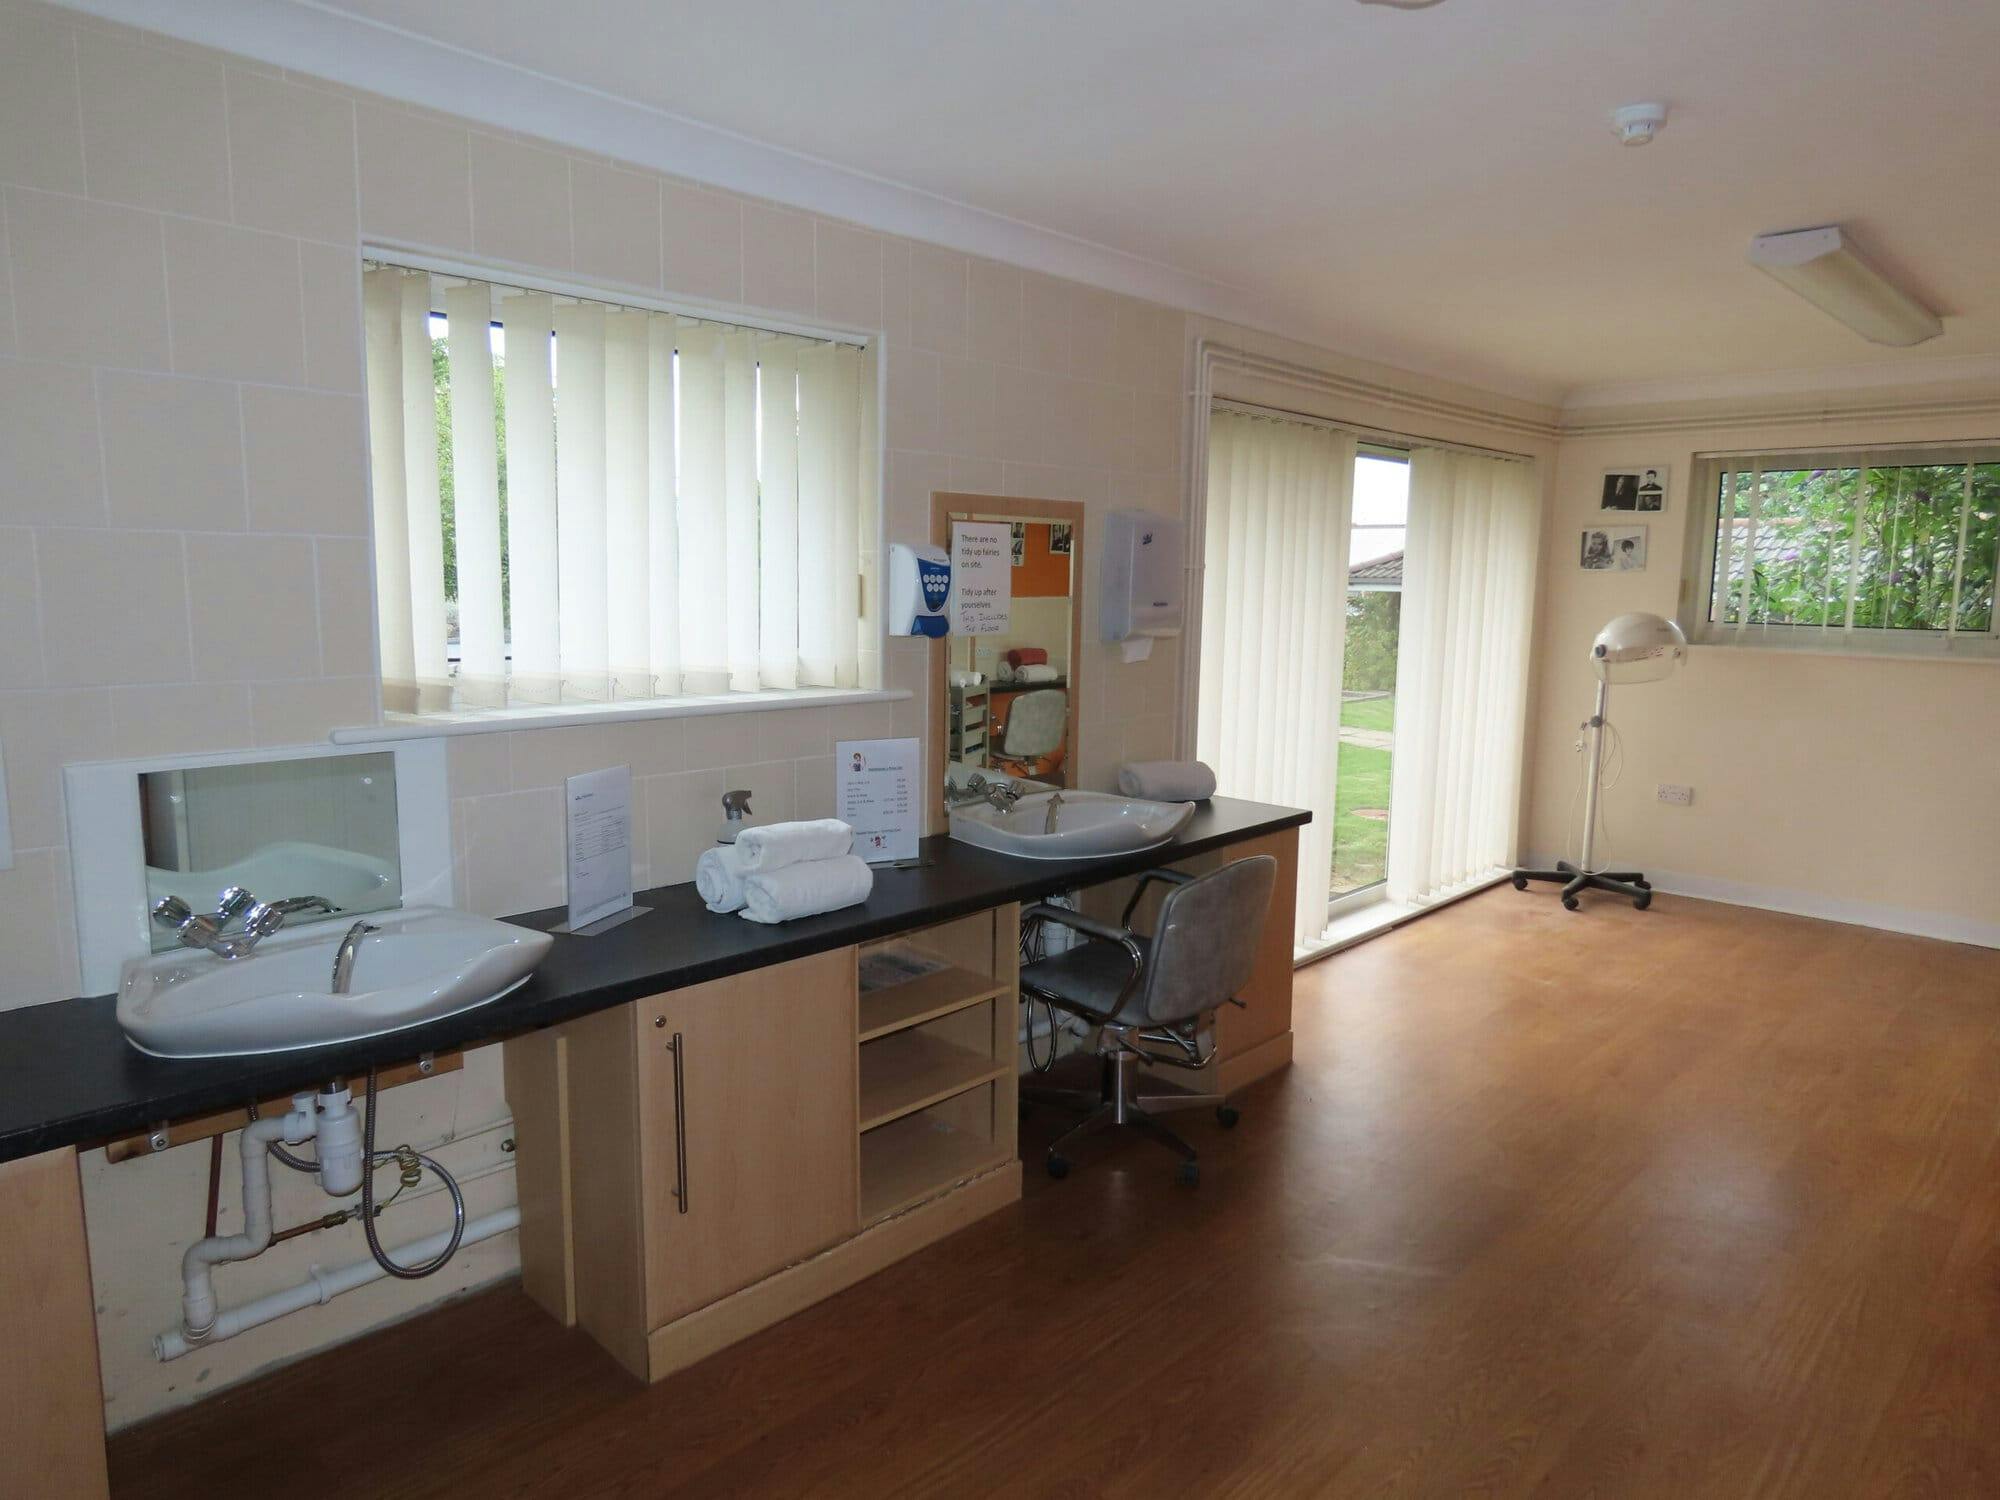 Salon at at Knowles Court Care Home, Bradford, West Yorkshire